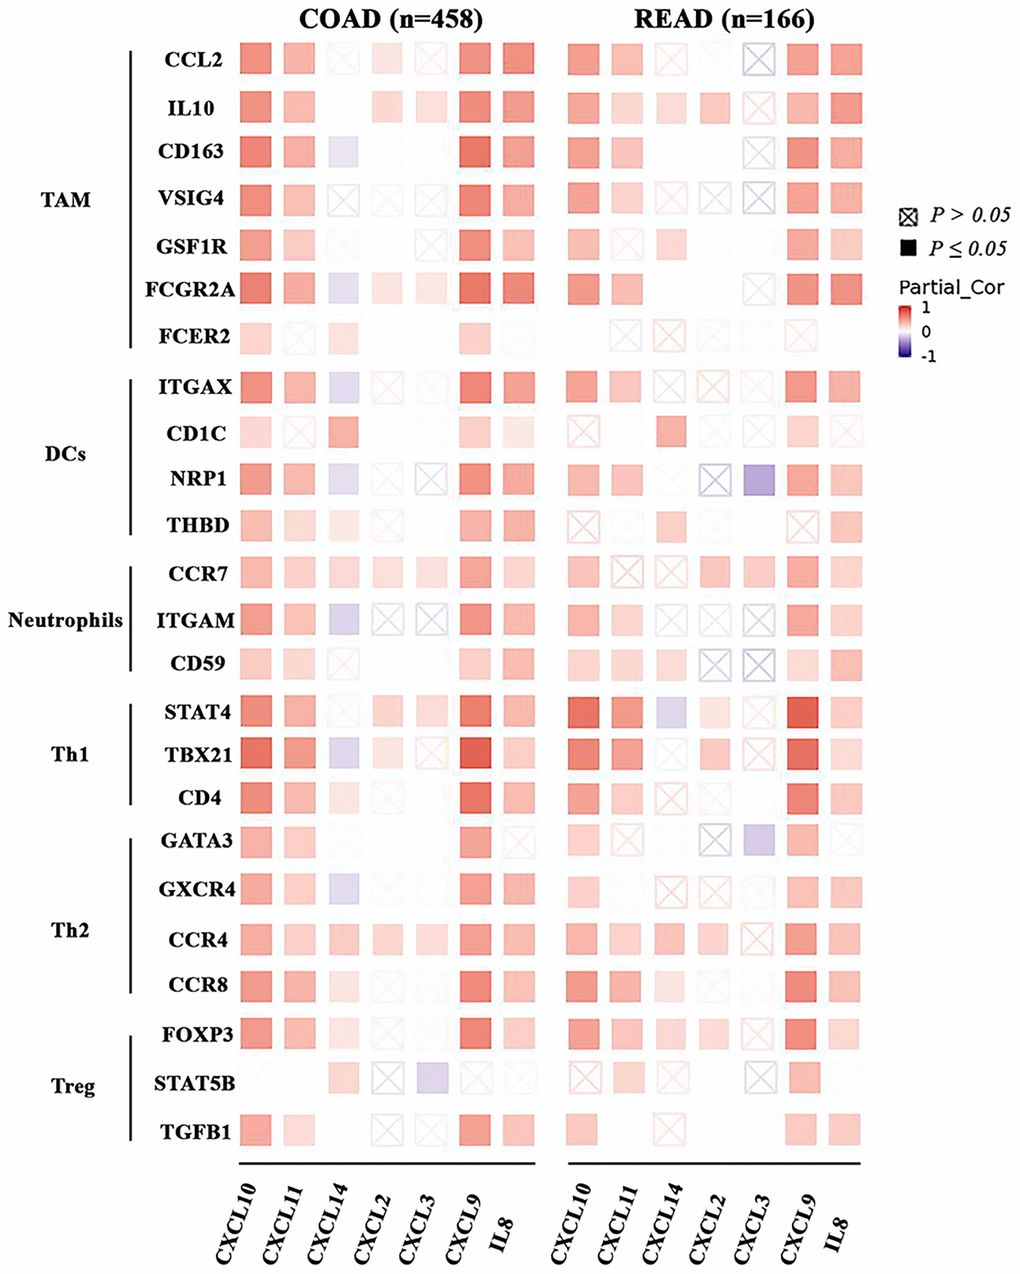 The association between the CXC chemokines expression and immune markers in ad heatmap table across COAD and READ. The red indicates a statistically significant positive association (P ≤ 0.05, rho > 0), and the blue indicates a statistically significant negative association (P ≤ 0.05, rho P > 0.05).